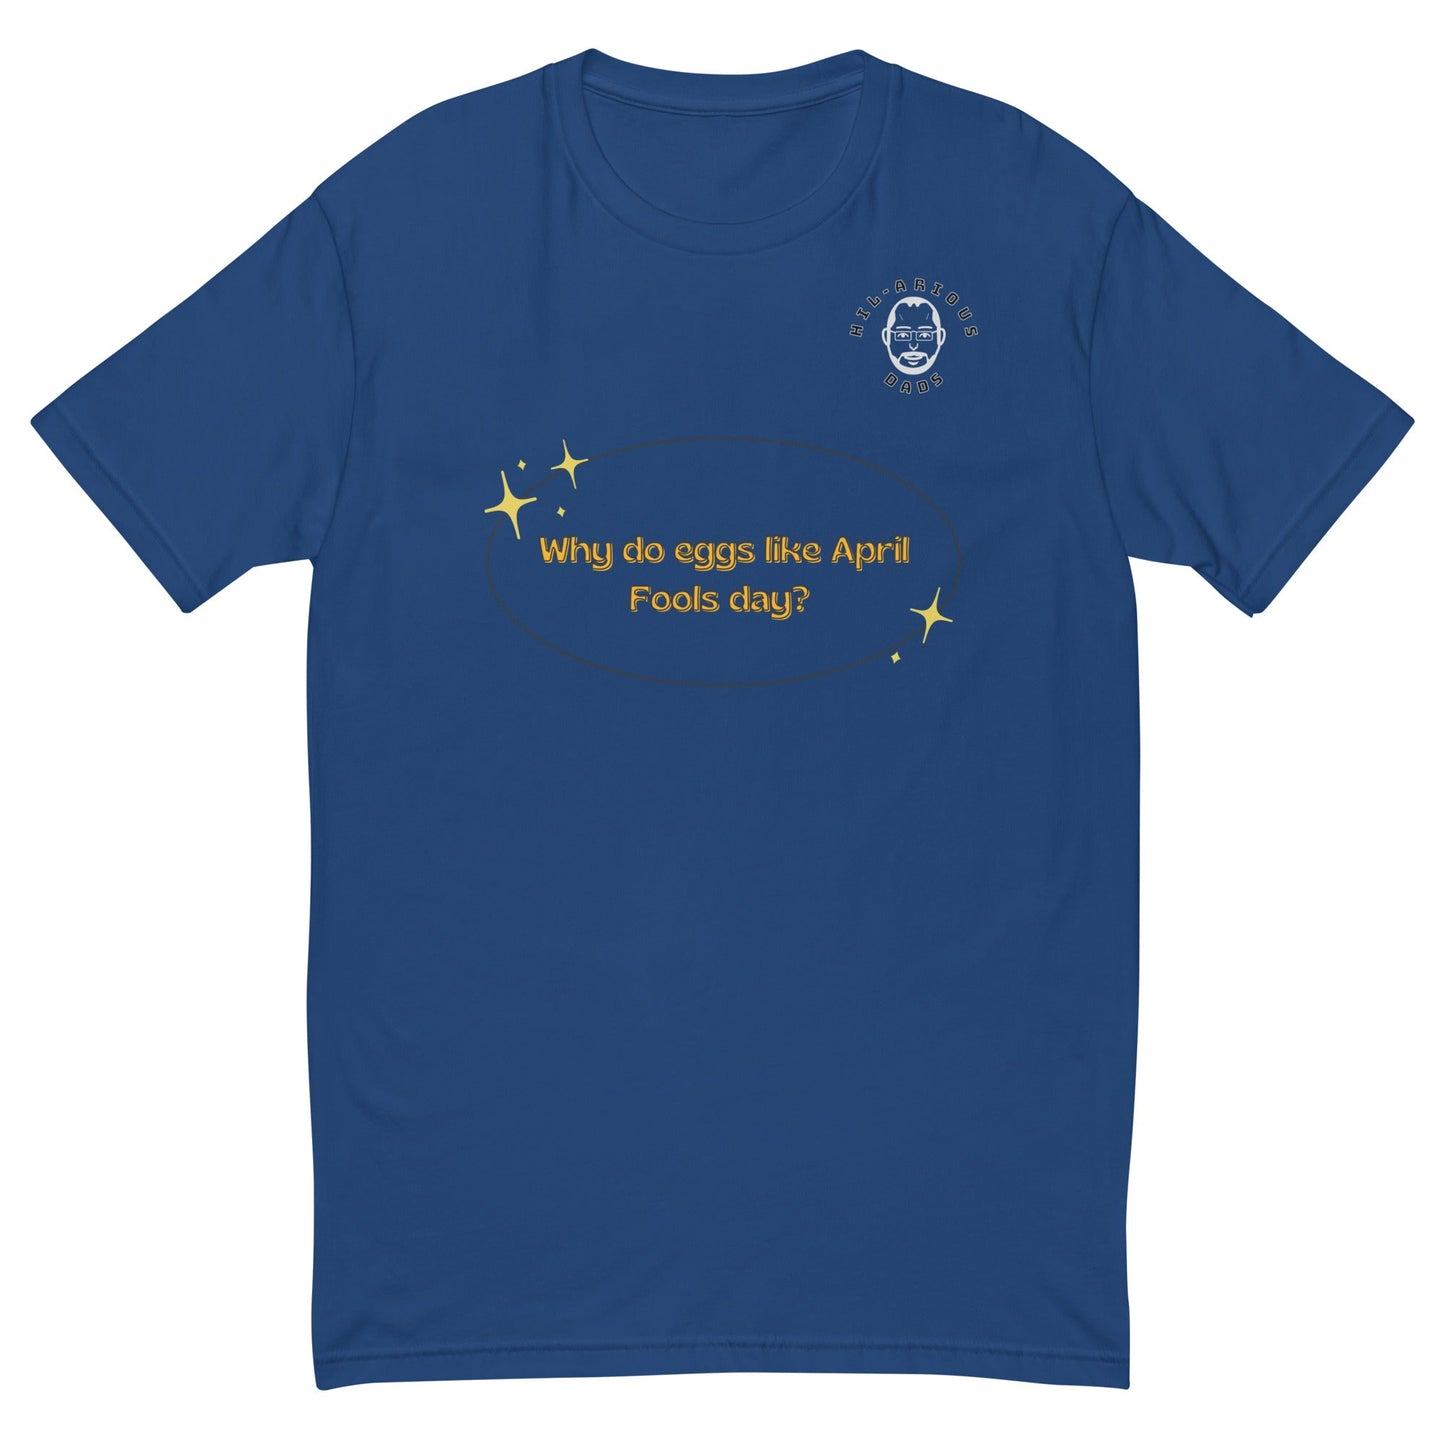 Why do eggs like April Fools day?-T-shirt - Hil-arious Dads